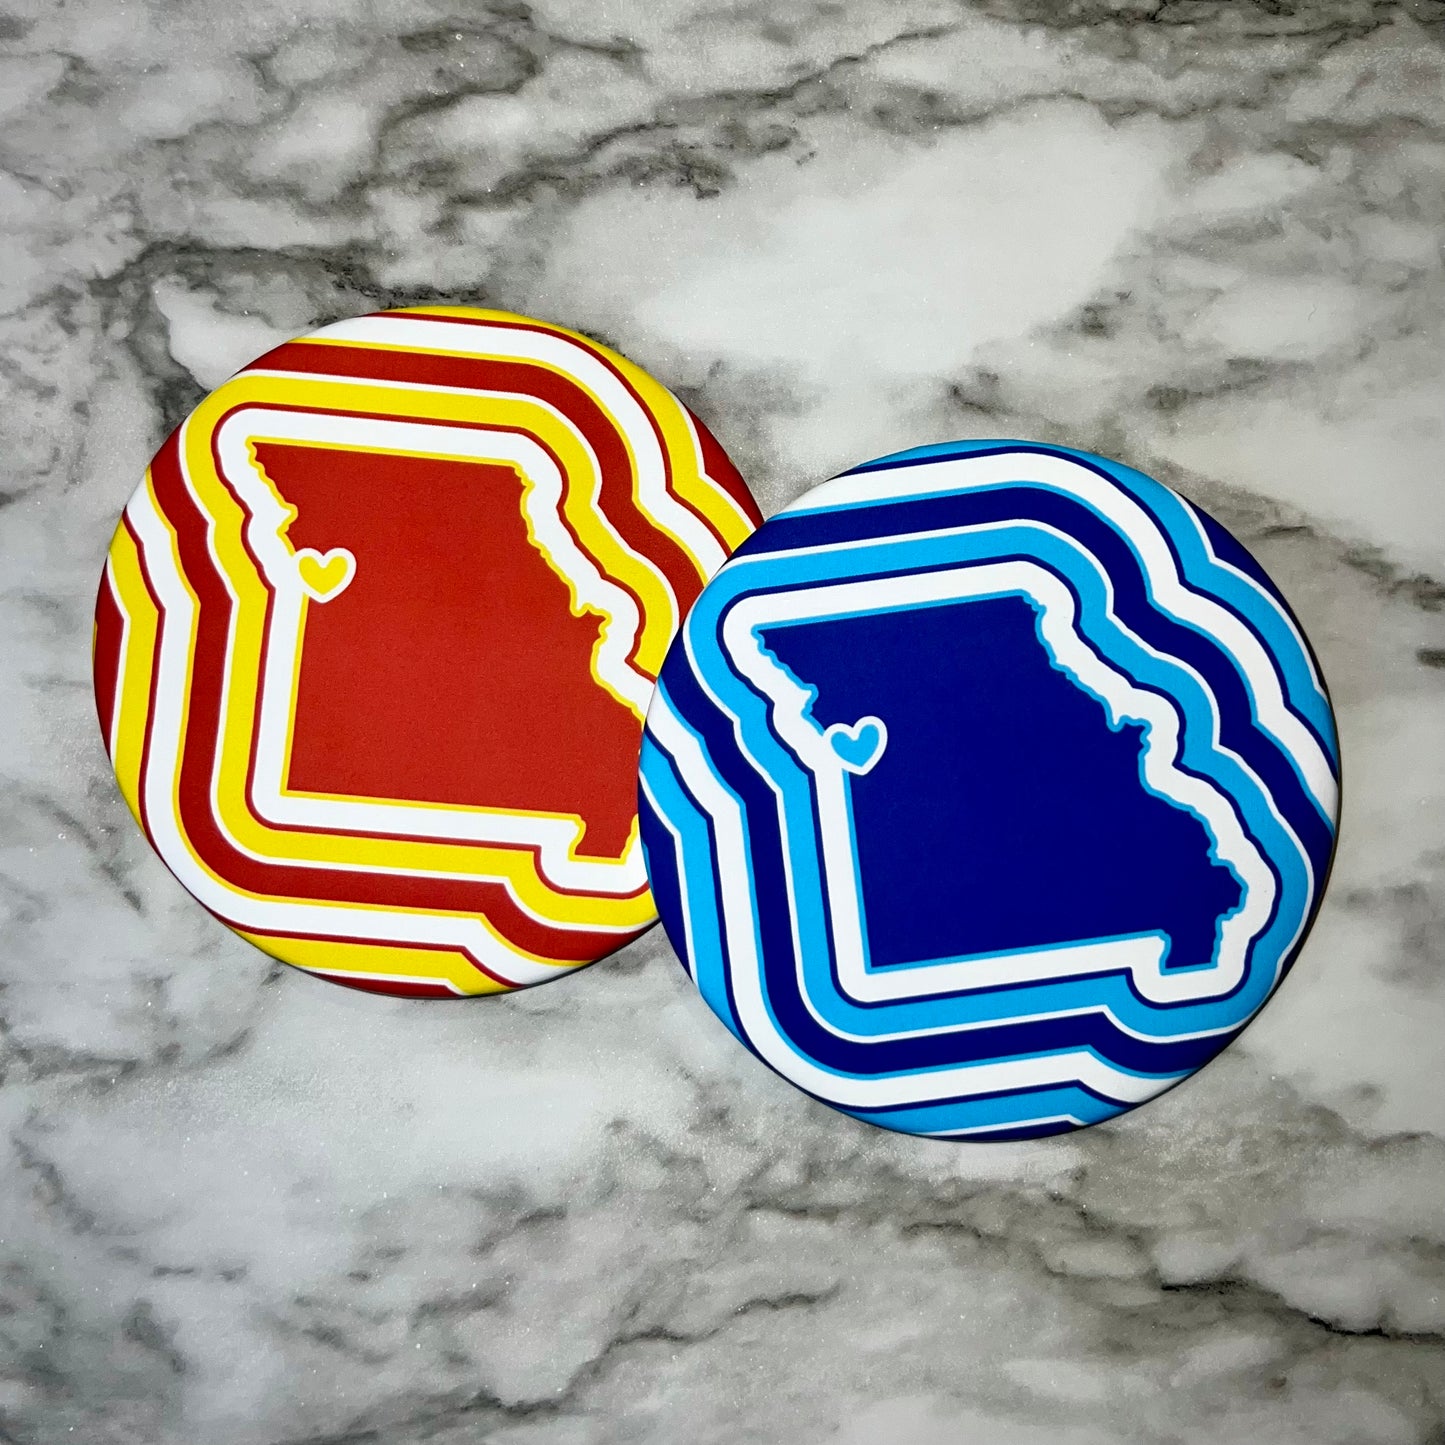 KCMO Coasters – Red/Blue Combo (Set of 2)